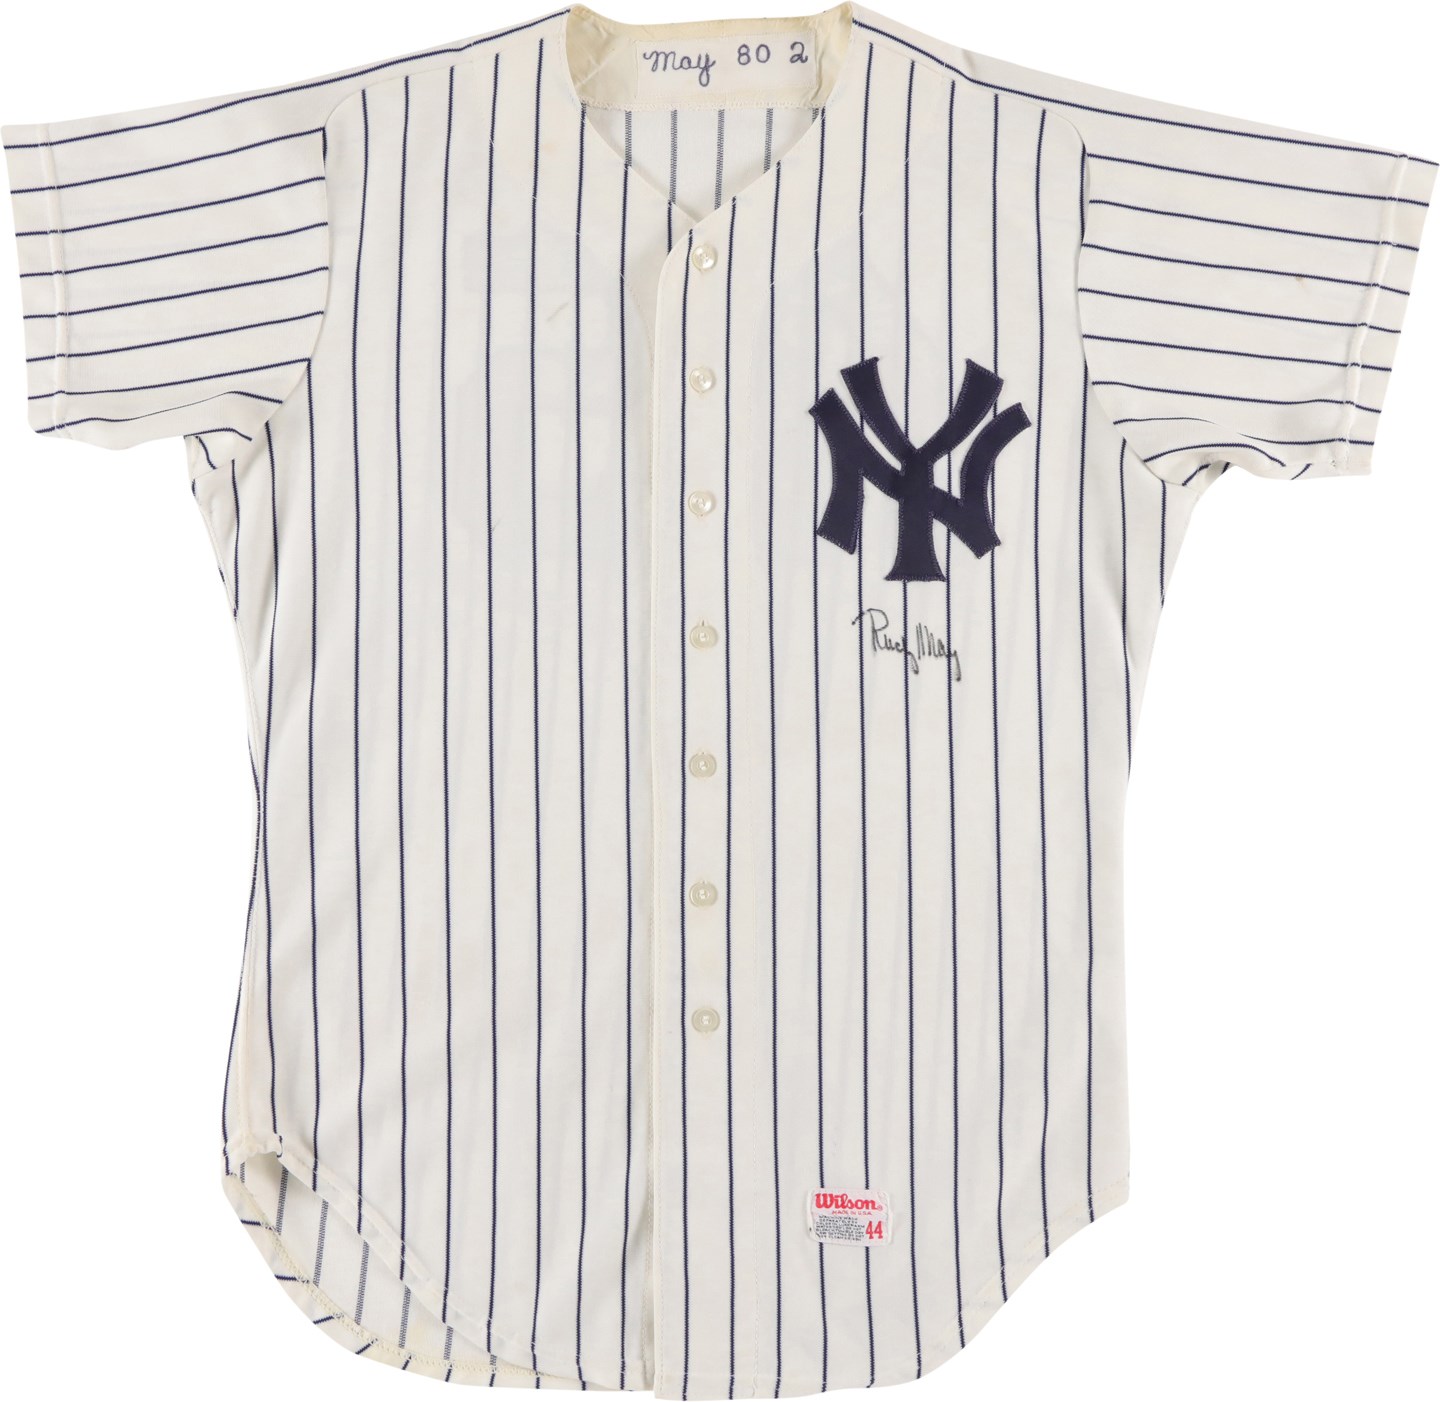 - 1980 Rudy May New York Yankees Signed Game Worn Jersey (PSA)